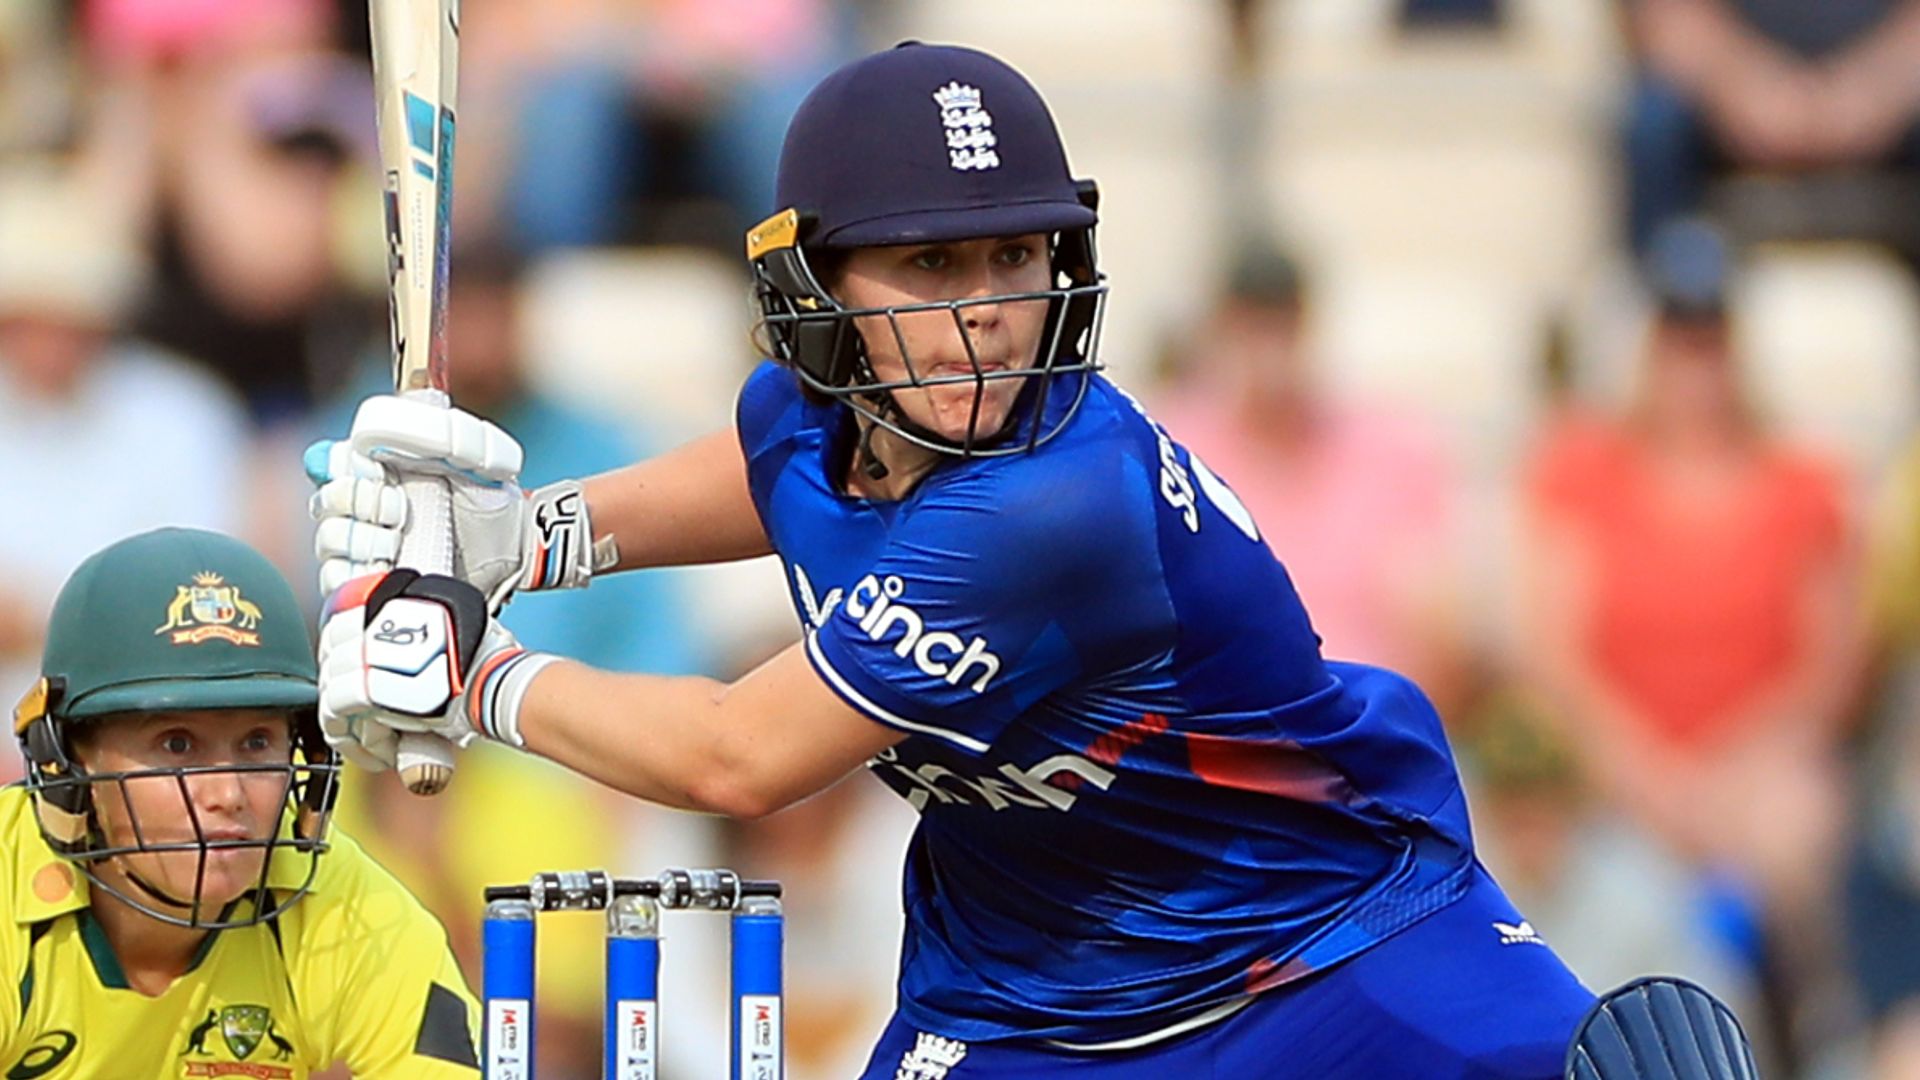 Sciver-Brunt included in ICC Women's ODI and T20 Team of the Year